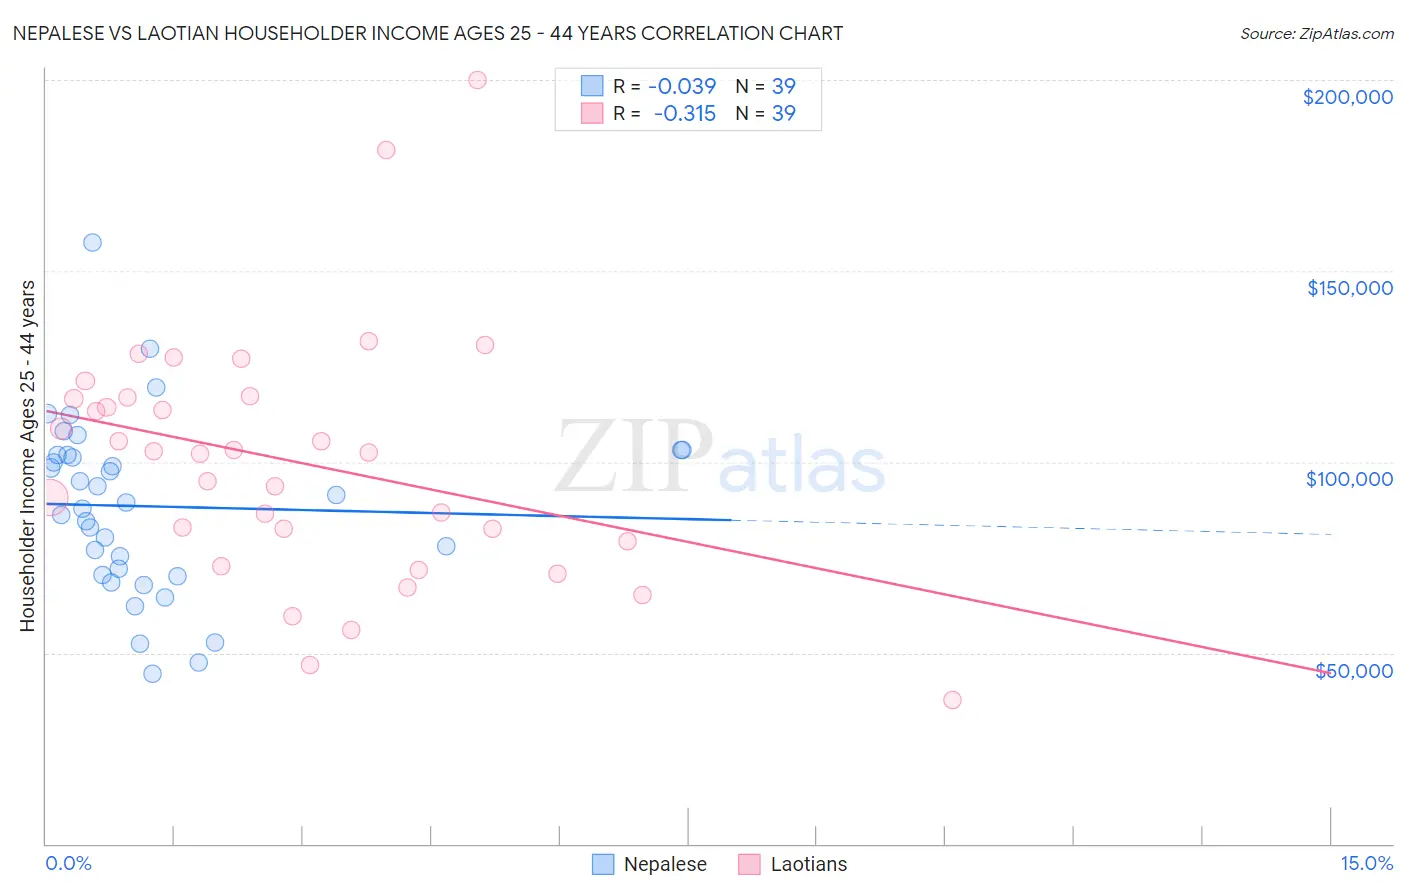 Nepalese vs Laotian Householder Income Ages 25 - 44 years